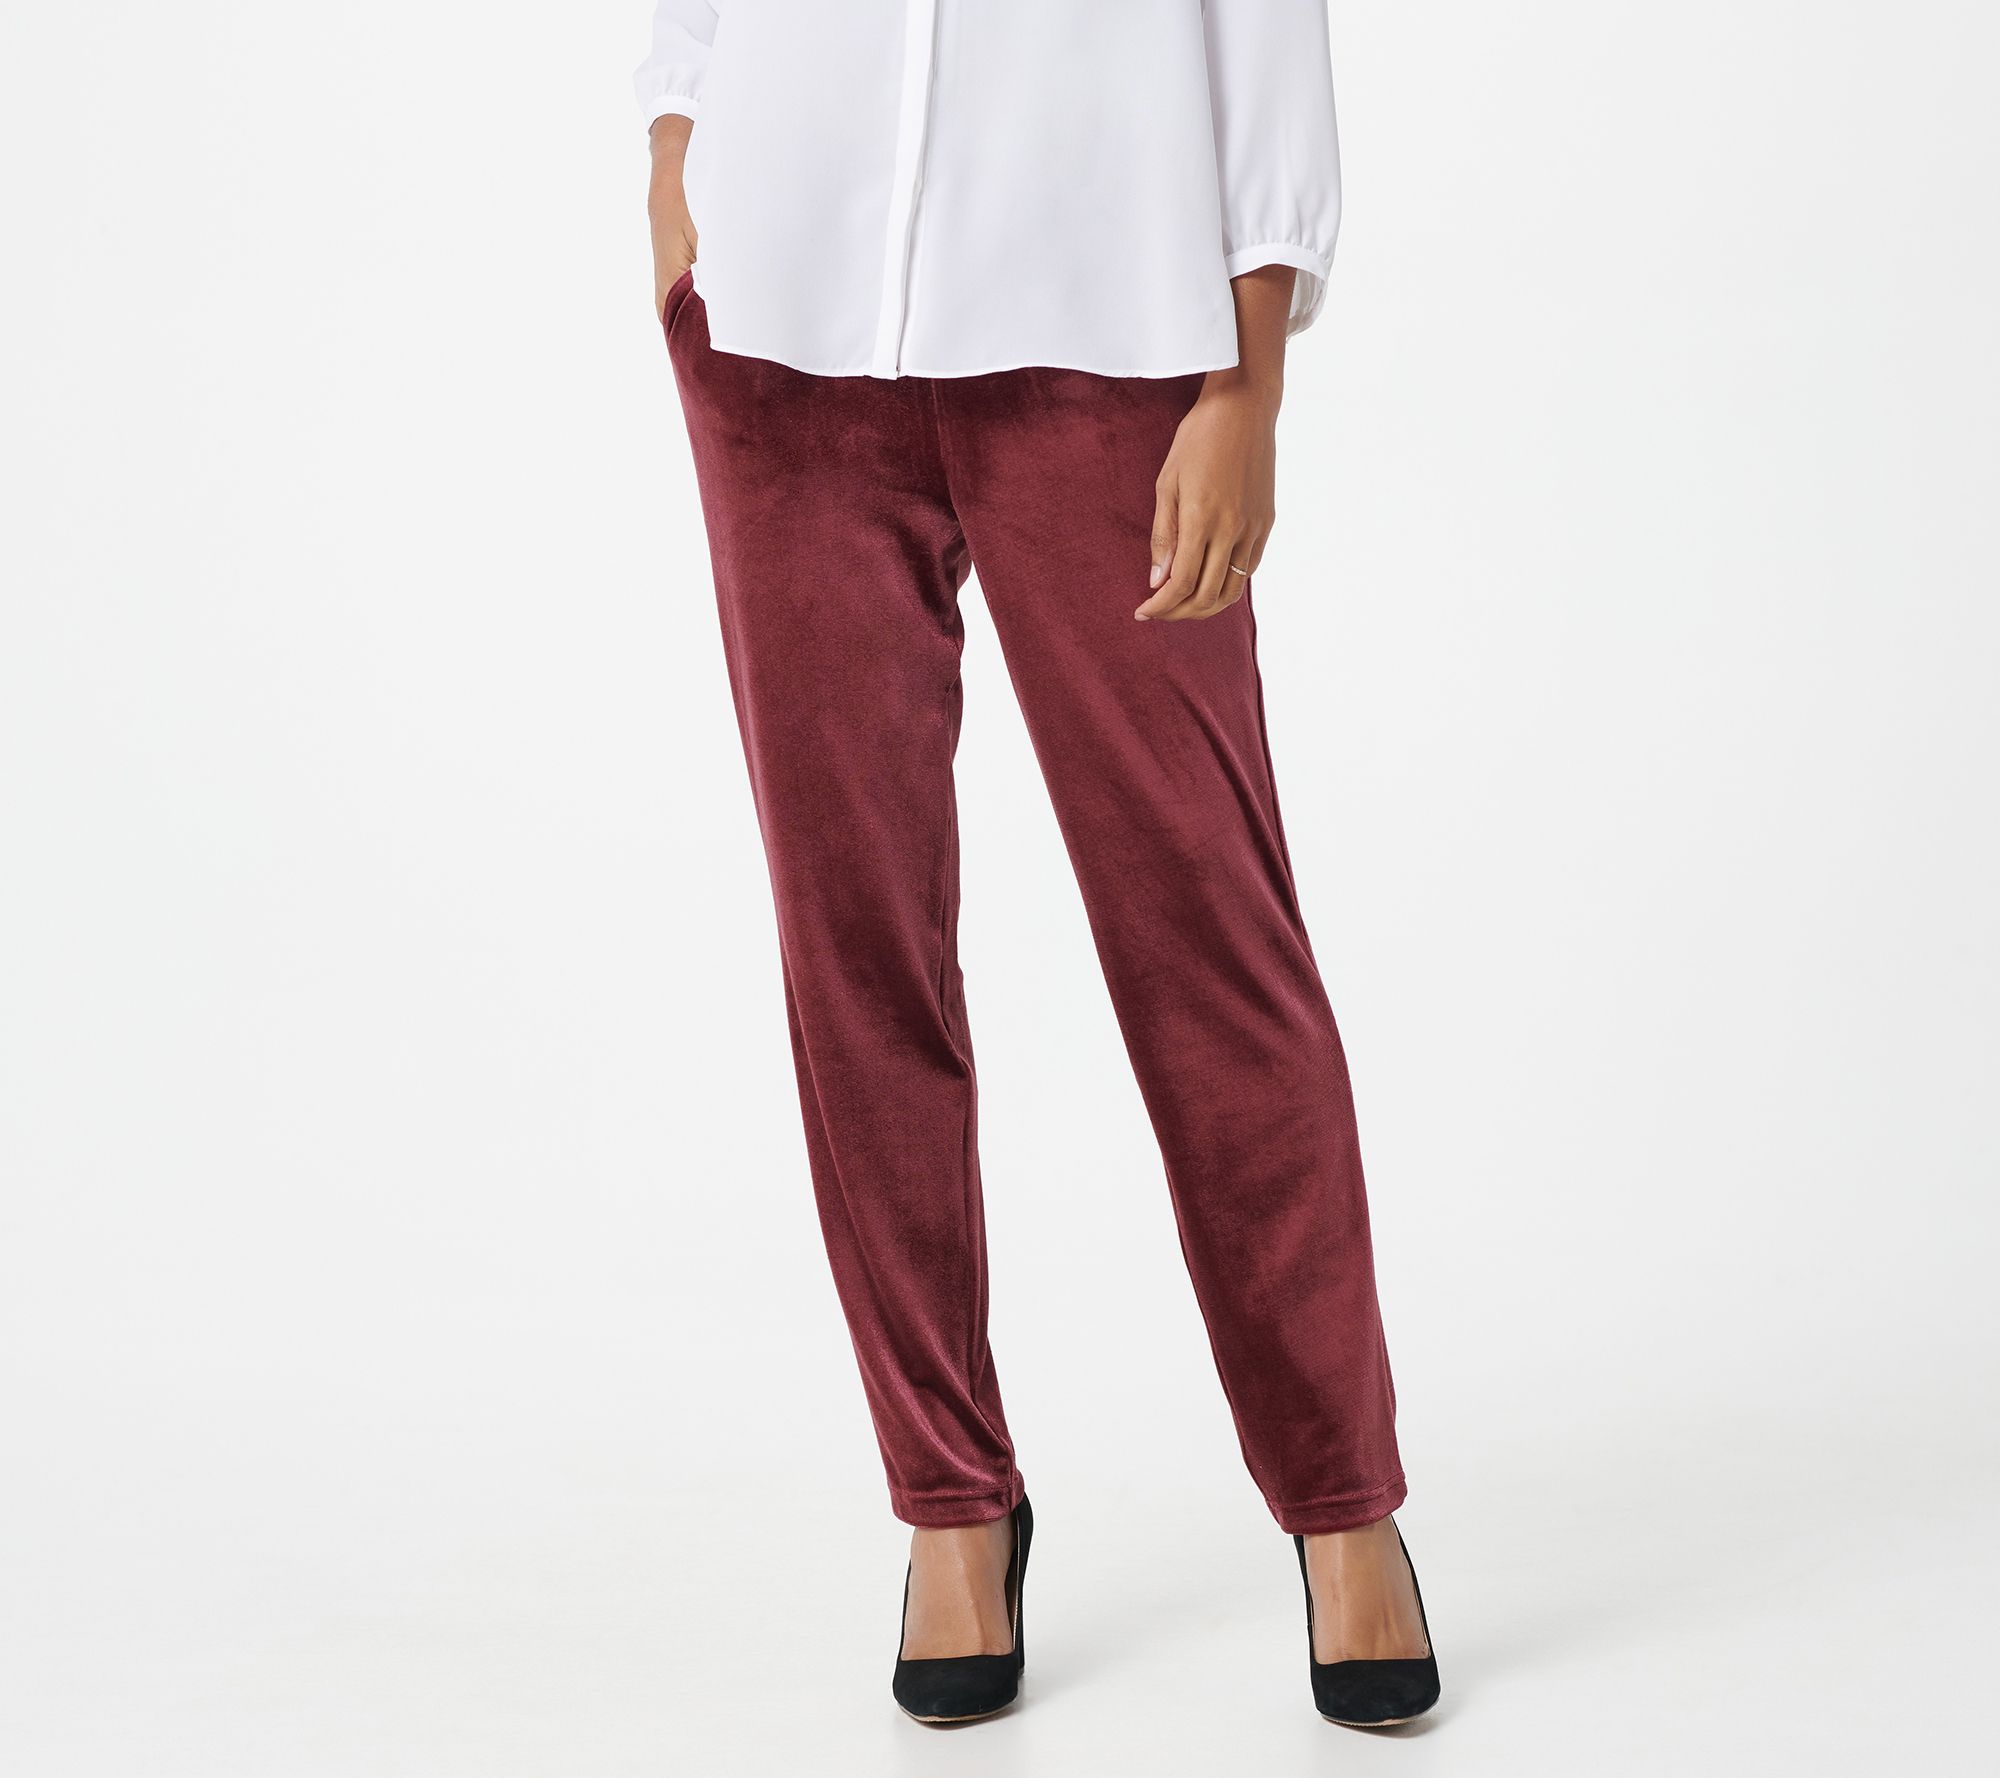 Joan Rivers Classics Collection - Red - Pants 